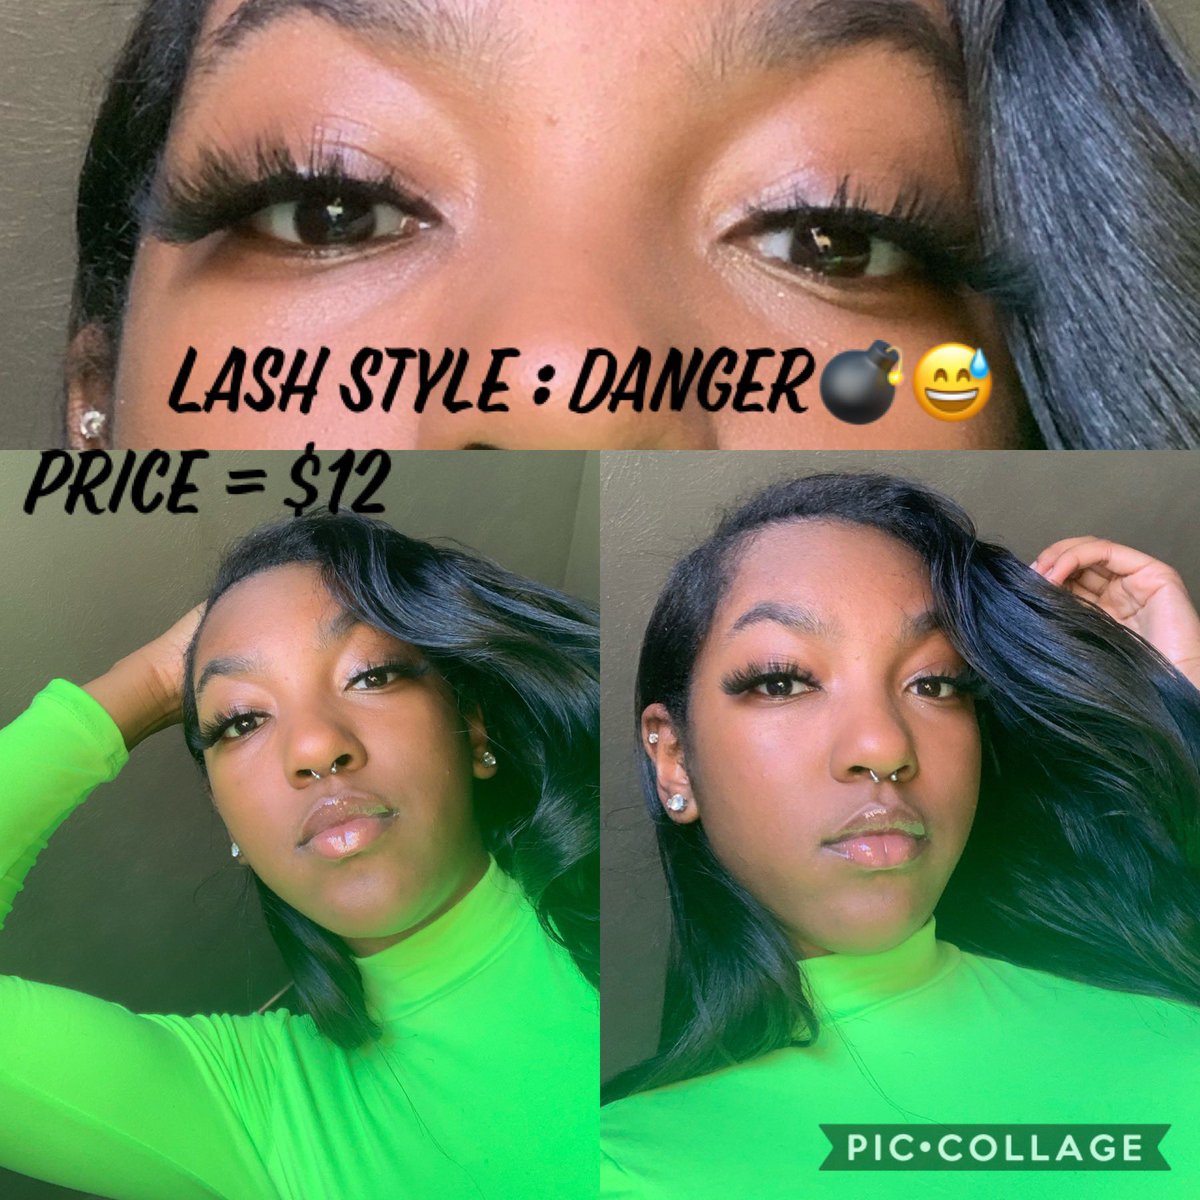 Lash style: Danger😅 Pick Up And dropoff available at #ODU just dm us or @big_chillaaaan to schedule a time
#odulashes #odu20 #odu21 #odu22 #odu19